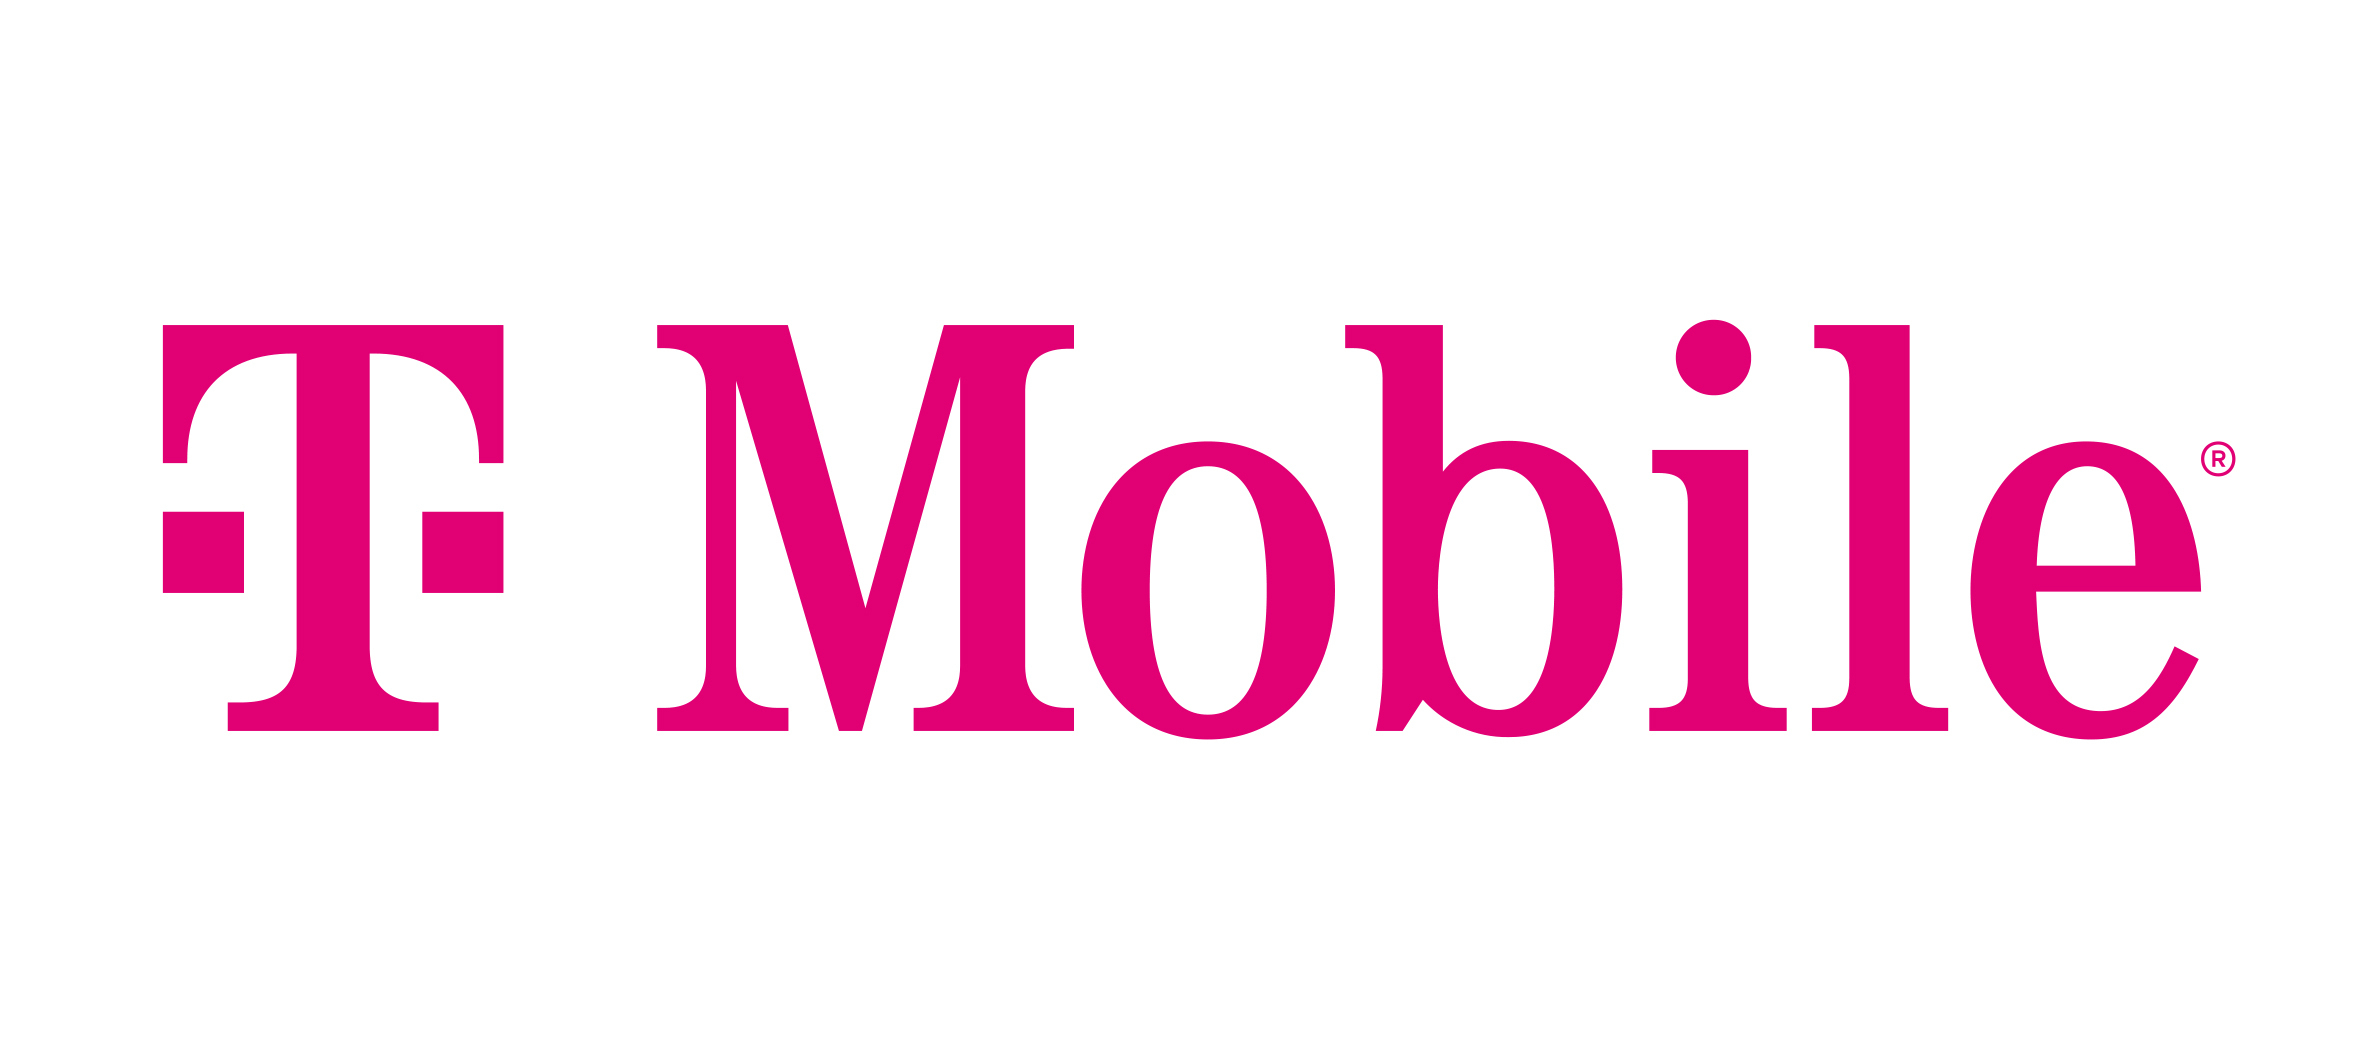 T-Mobile Home Run Derby 2019 - T-Mobile Newsroom